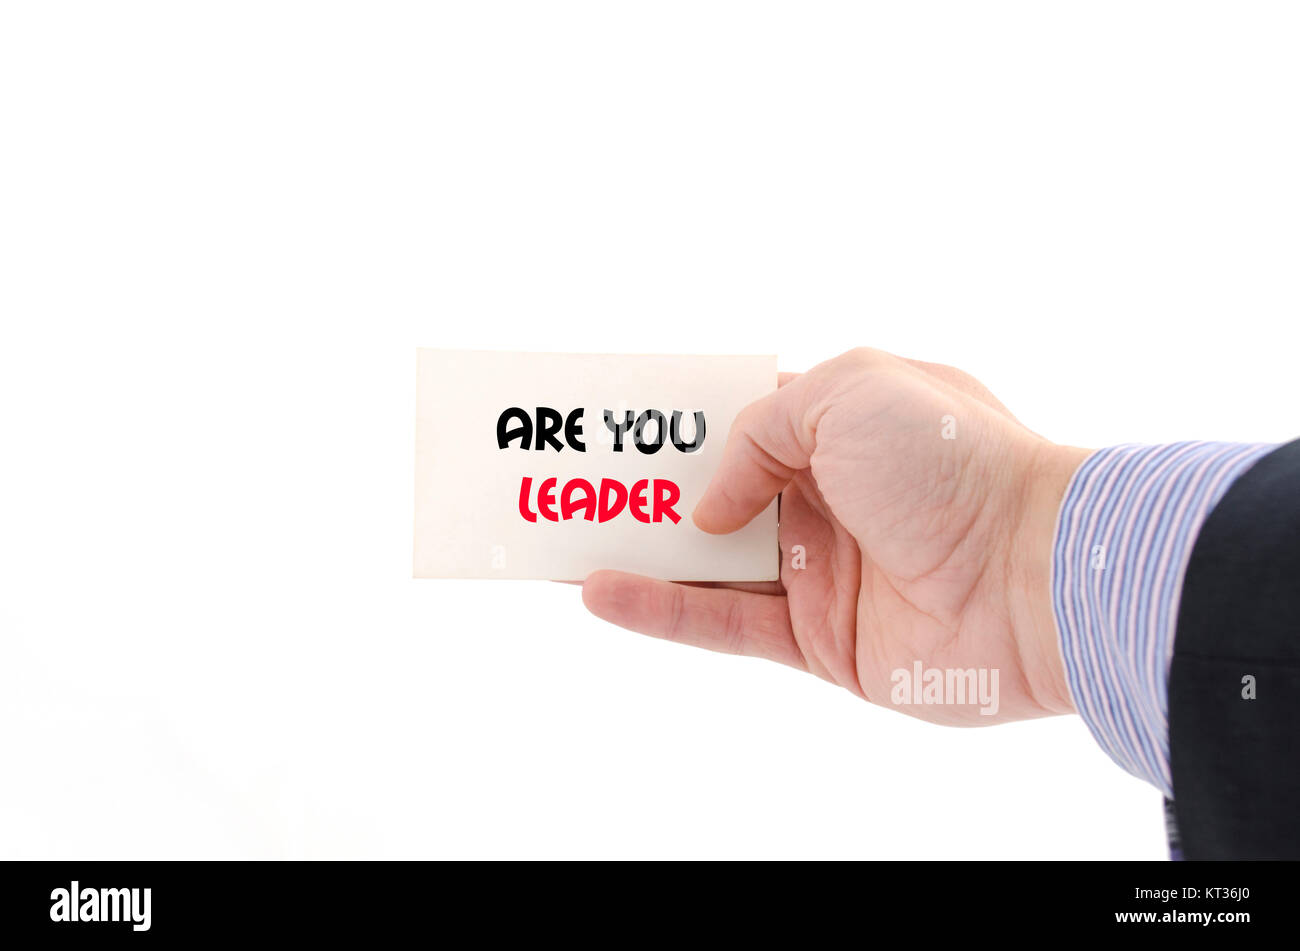 Are you leader text concept Stock Photo